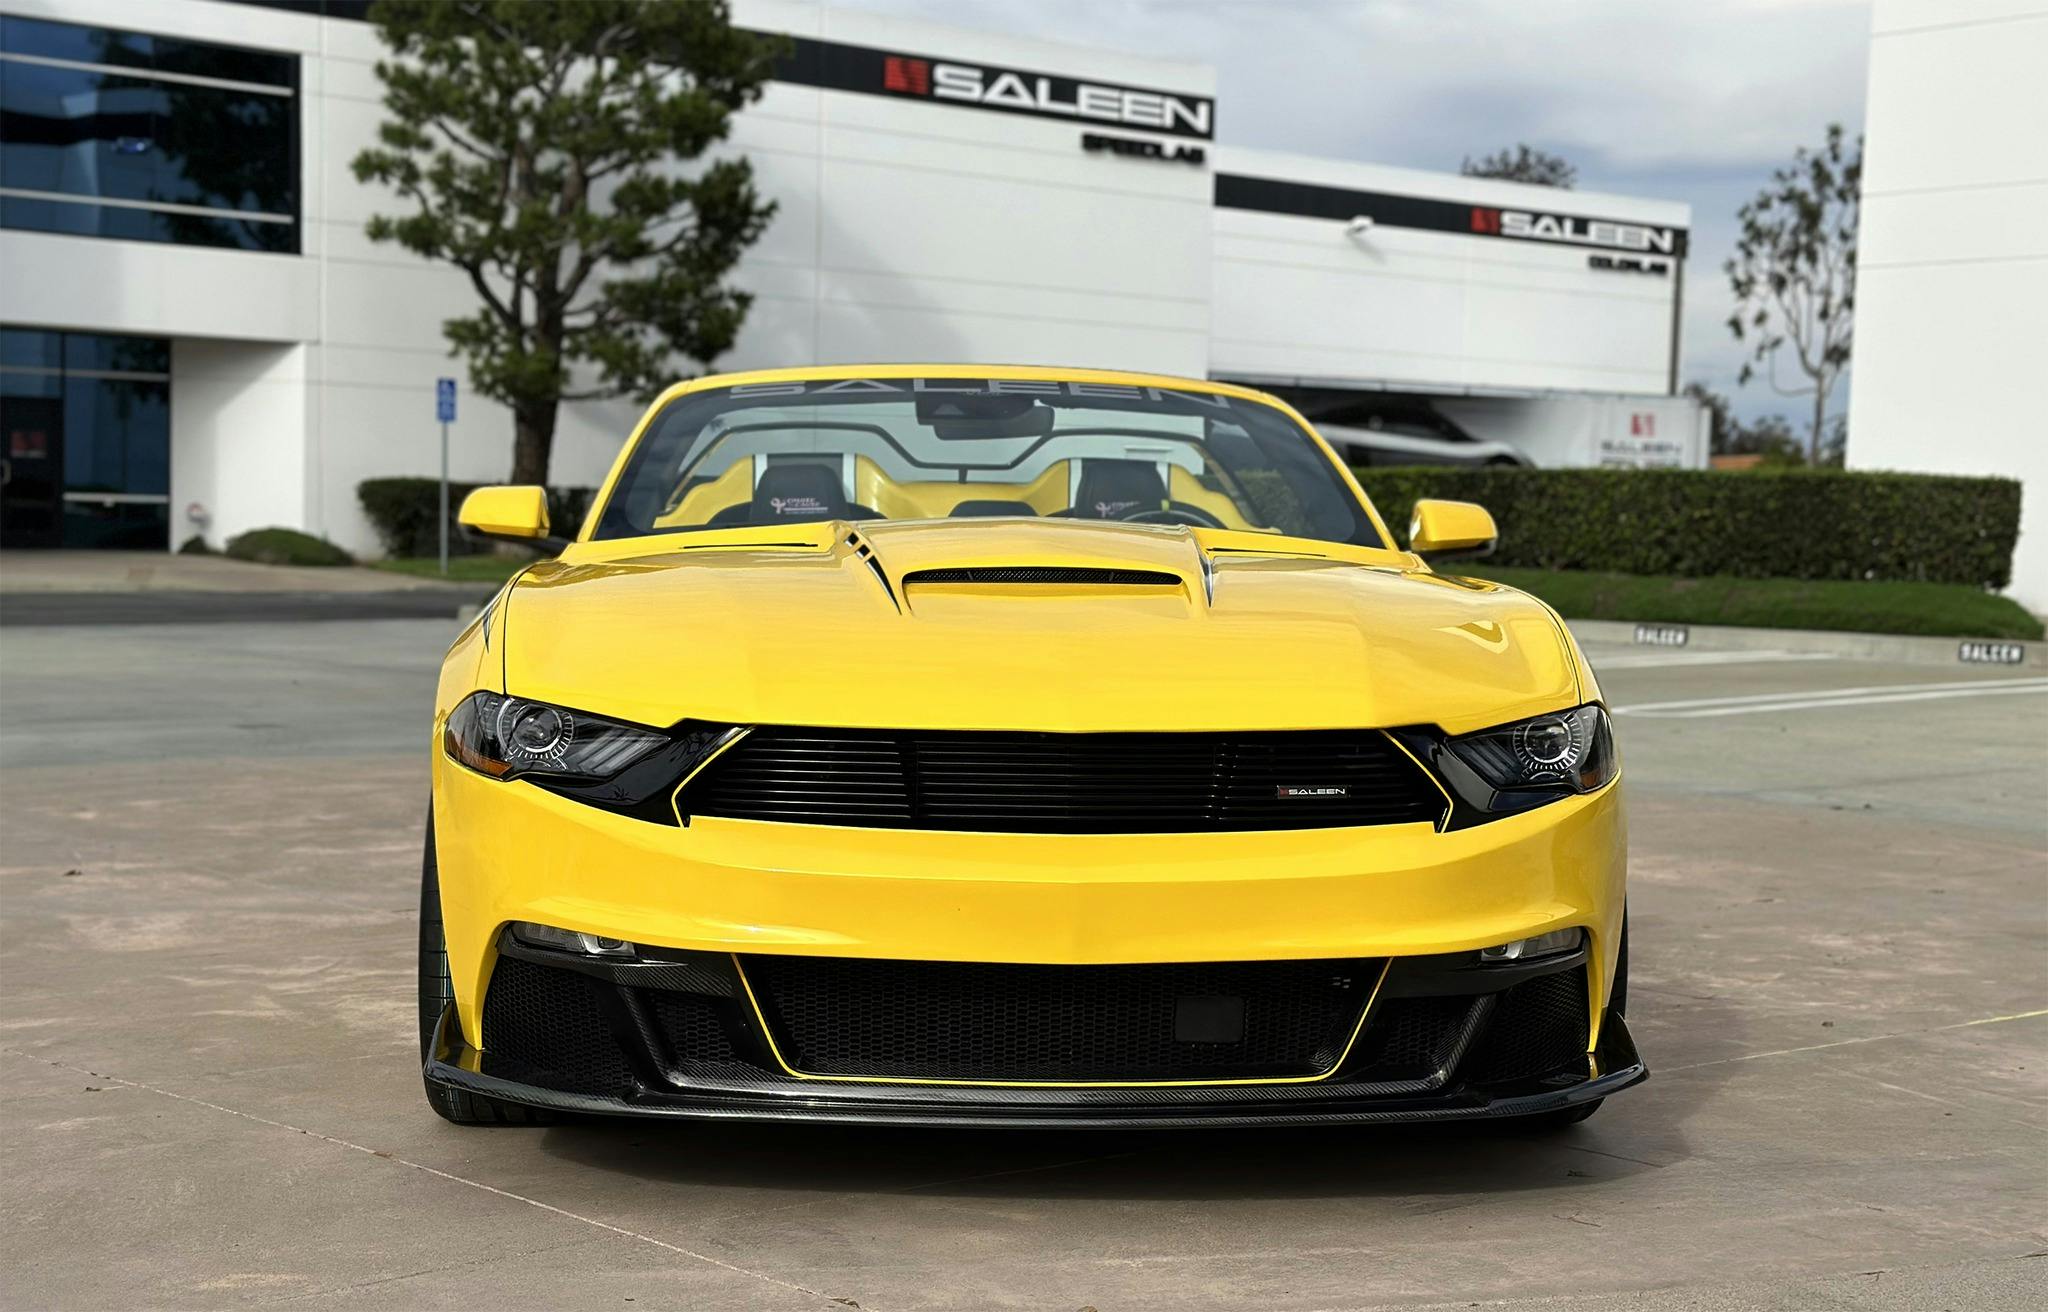 Saleen 40th Anniversary Mustang edition front